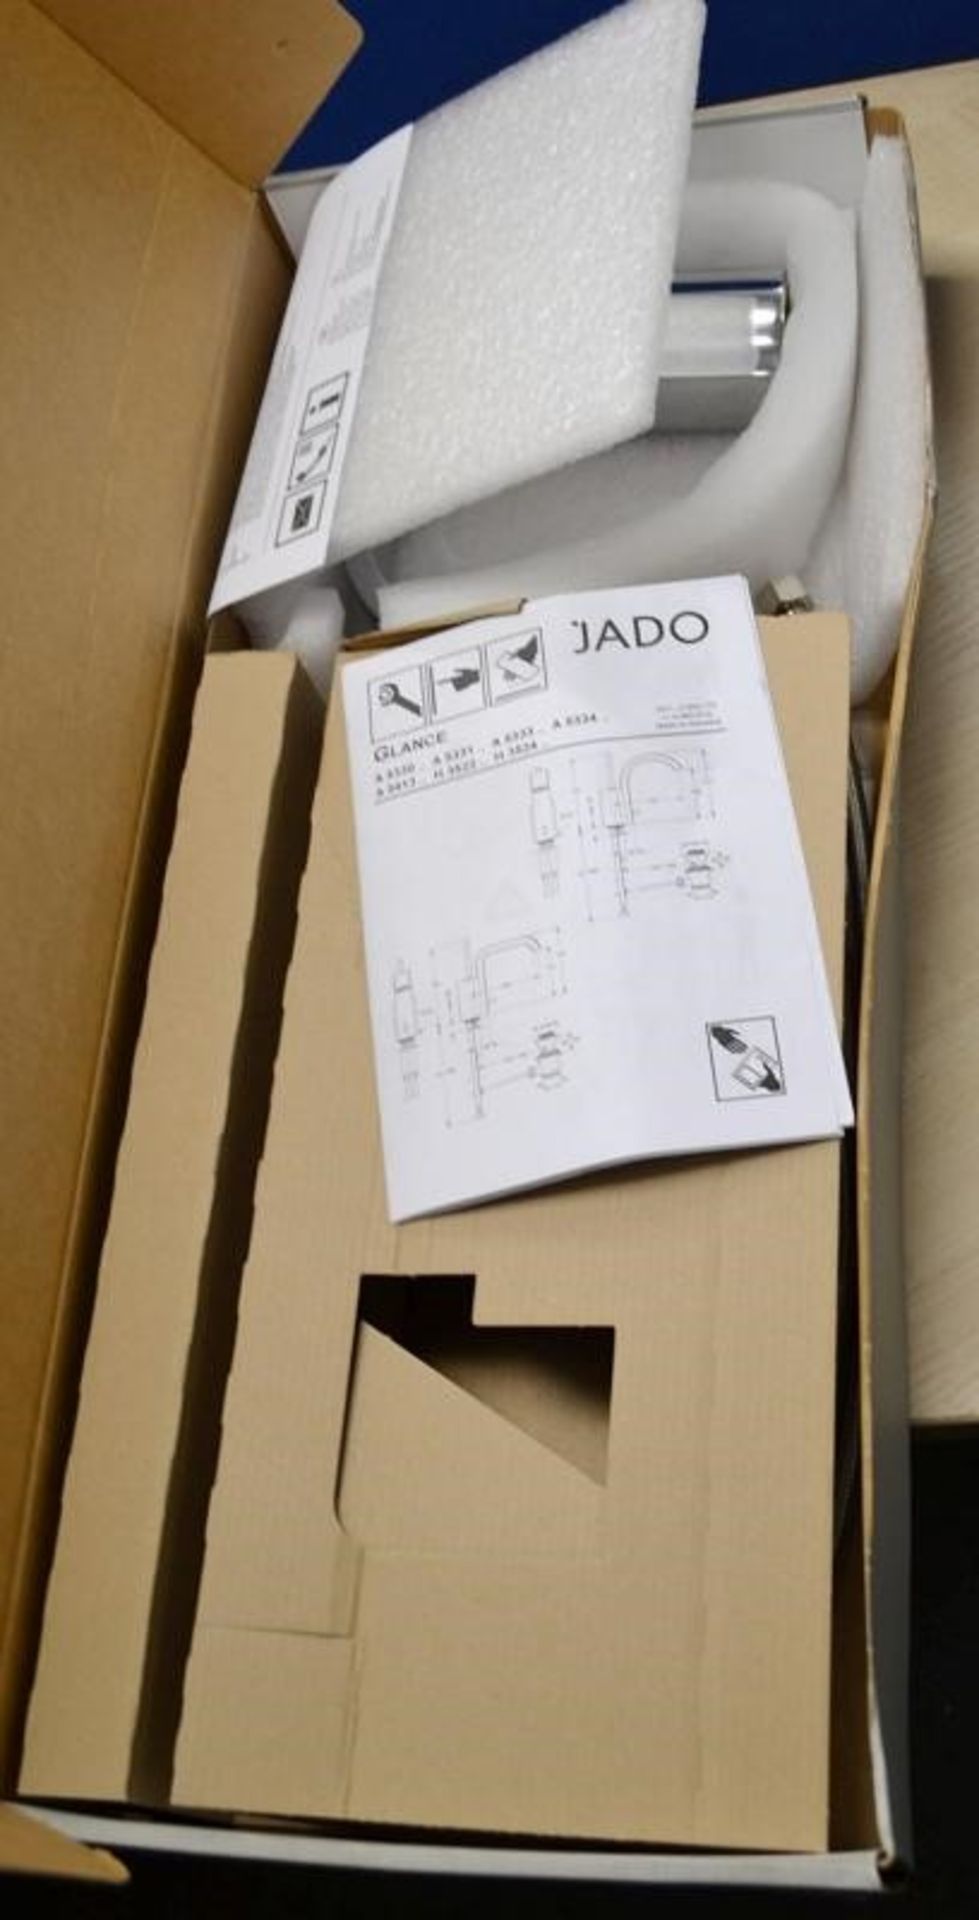 1 x Ideal Standard JADO "Glance" Basin Monoblock Tap Without Waste (A5331AA) - Image 4 of 6